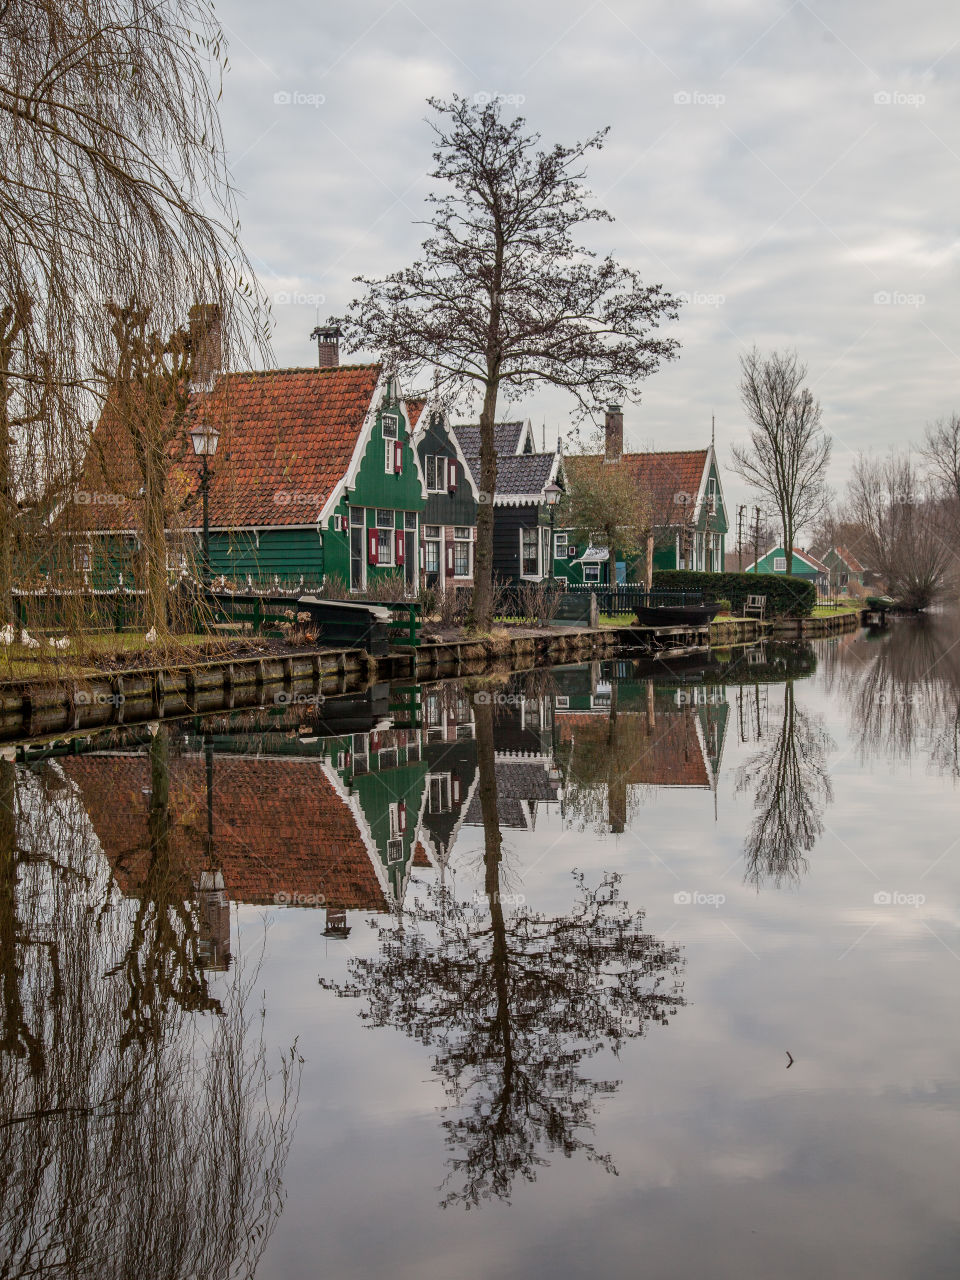 The small village in Holland